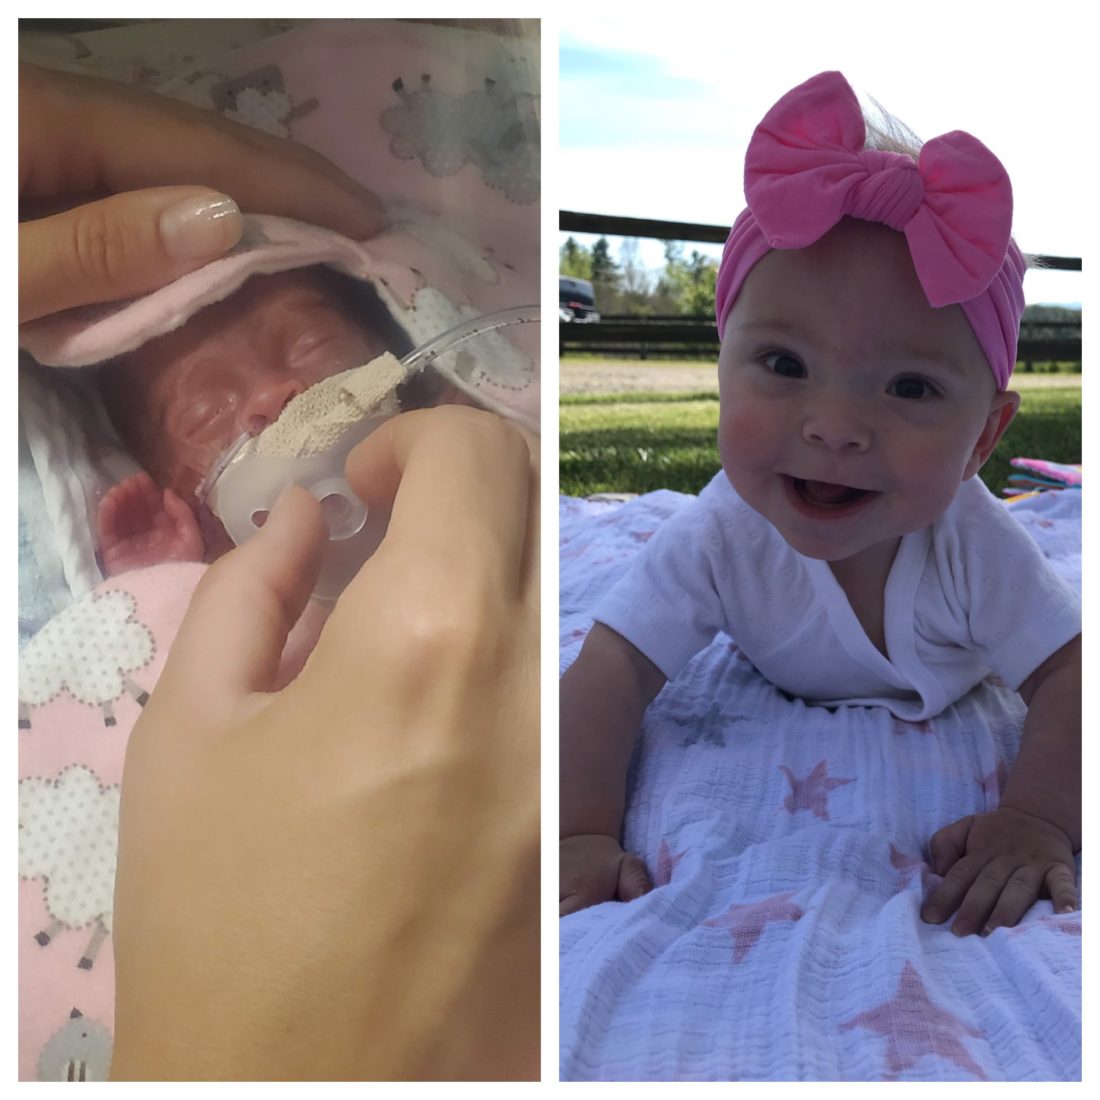 On left, a newborn baby in the NICU, and on right, the same baby playing outside. 